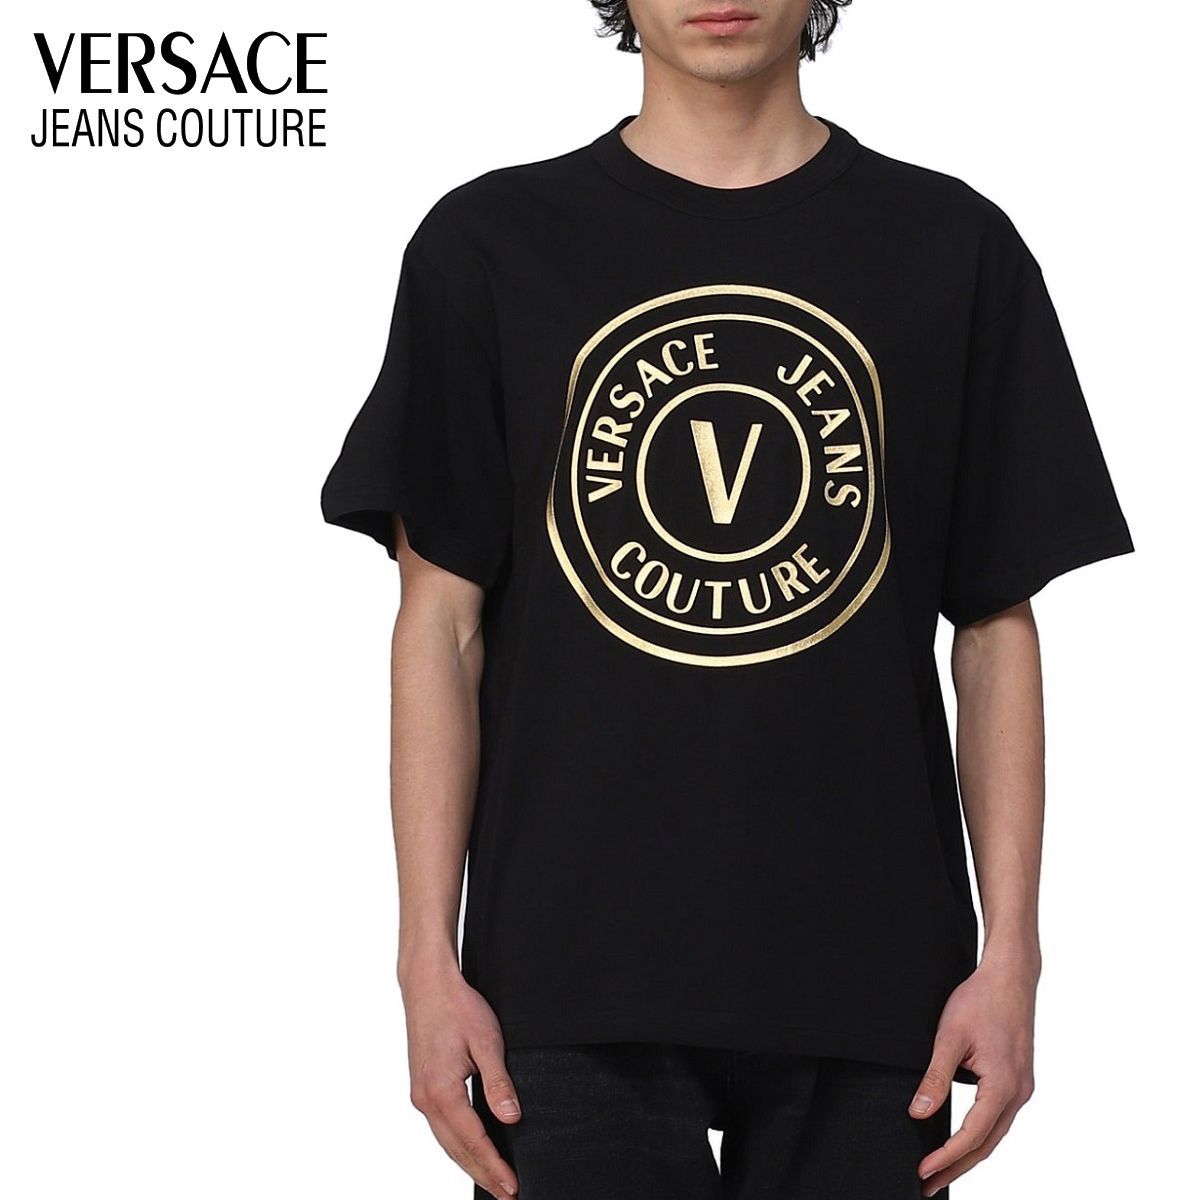 Versace Jeans Couture ヴェルサーチ カットソー Tシャツりーぬの商品